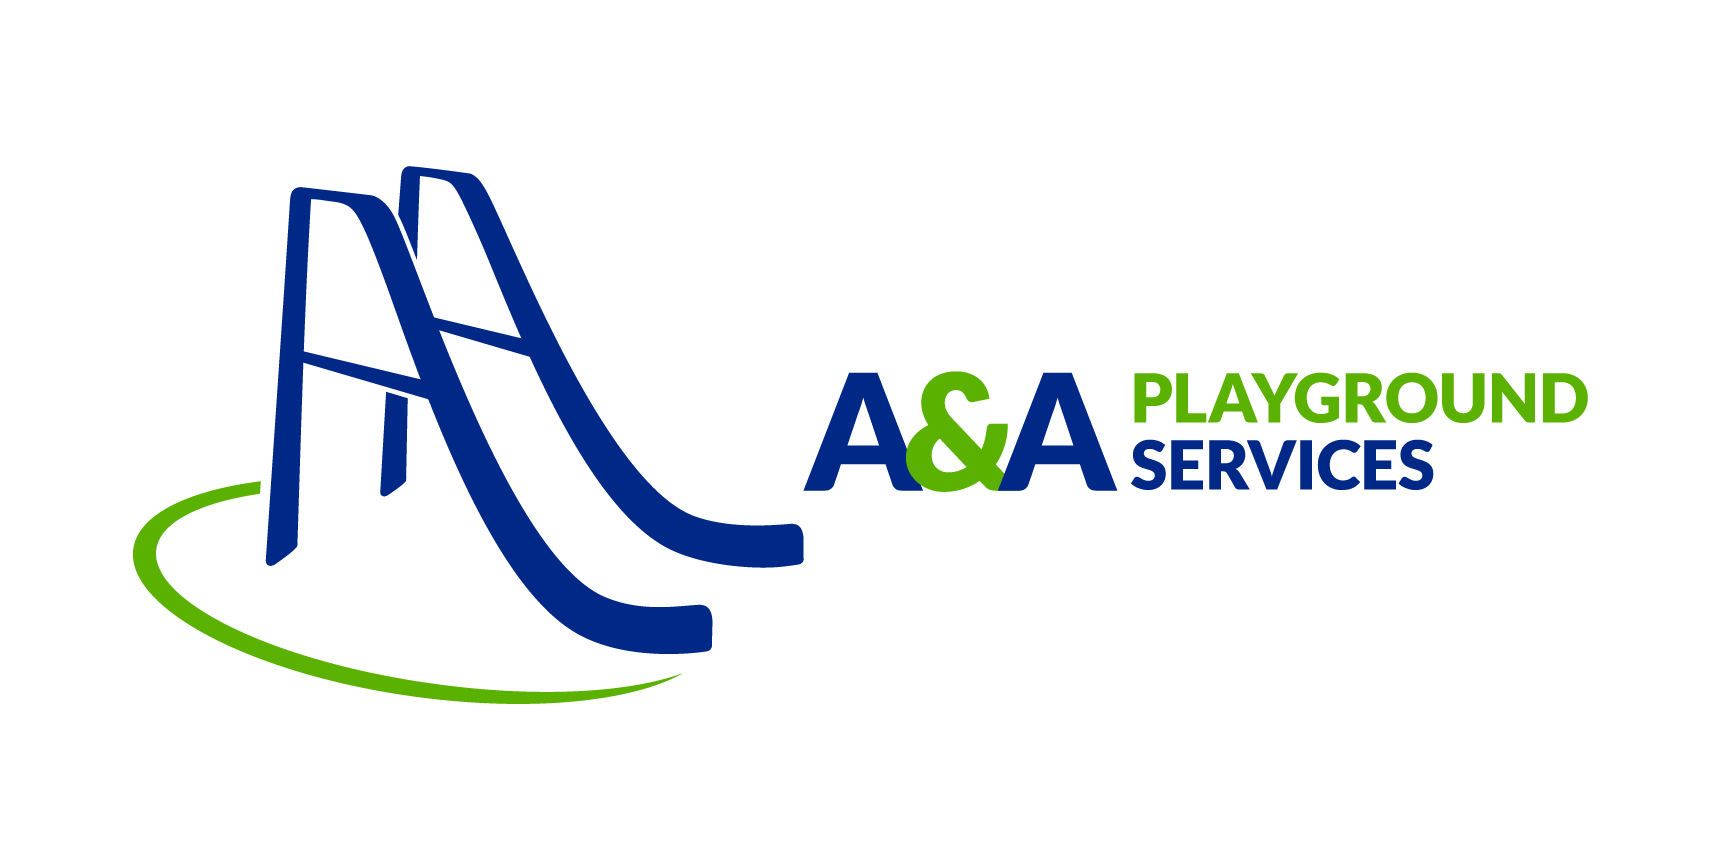 A & A Playground Services